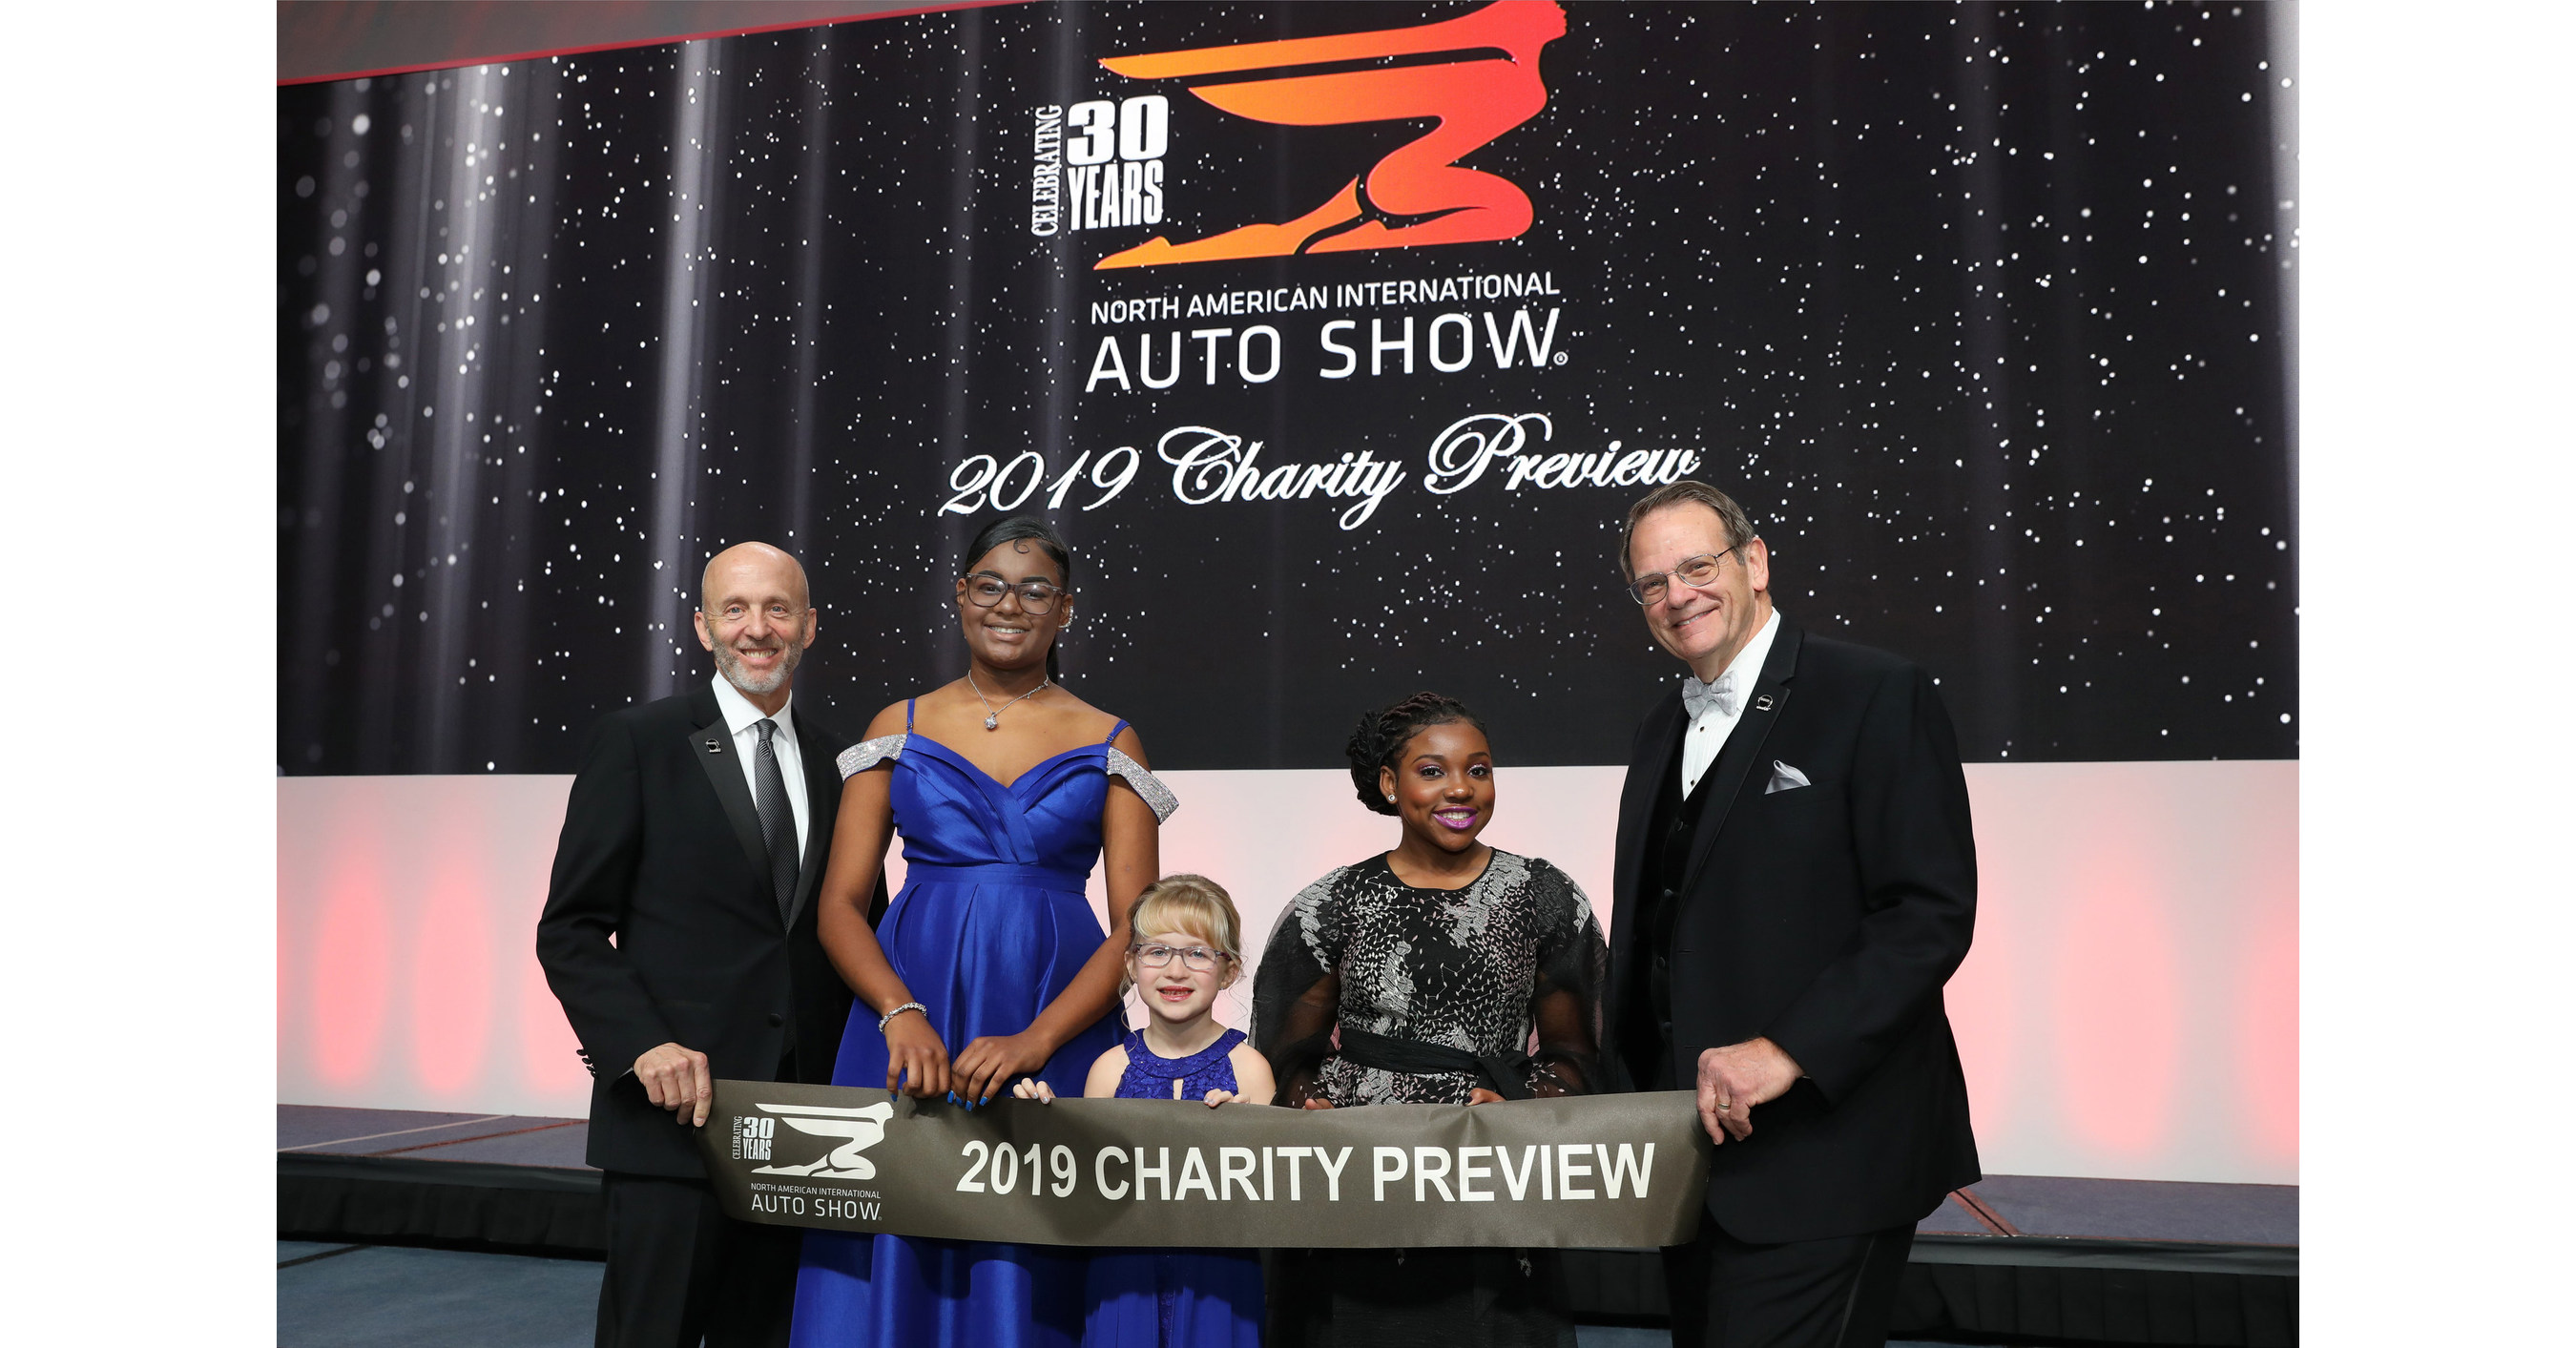 Charity Preview Raises Over 4M at North American International Auto